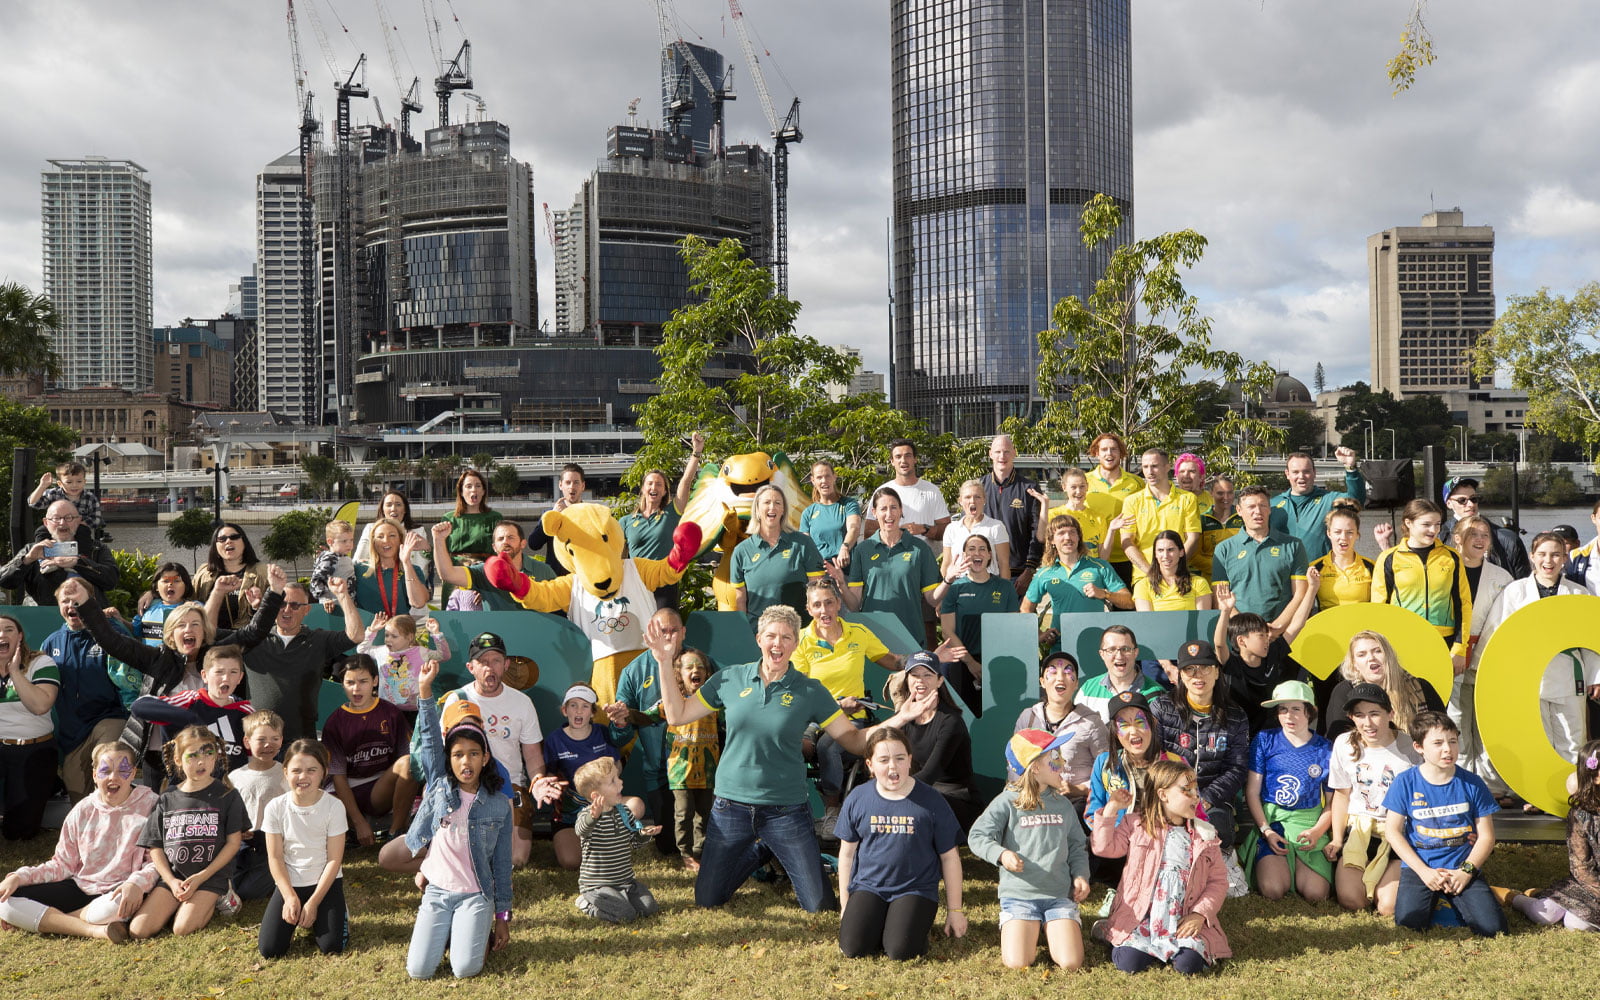 Brisbane 2032 Goes To Market For First Major Contract - Brand